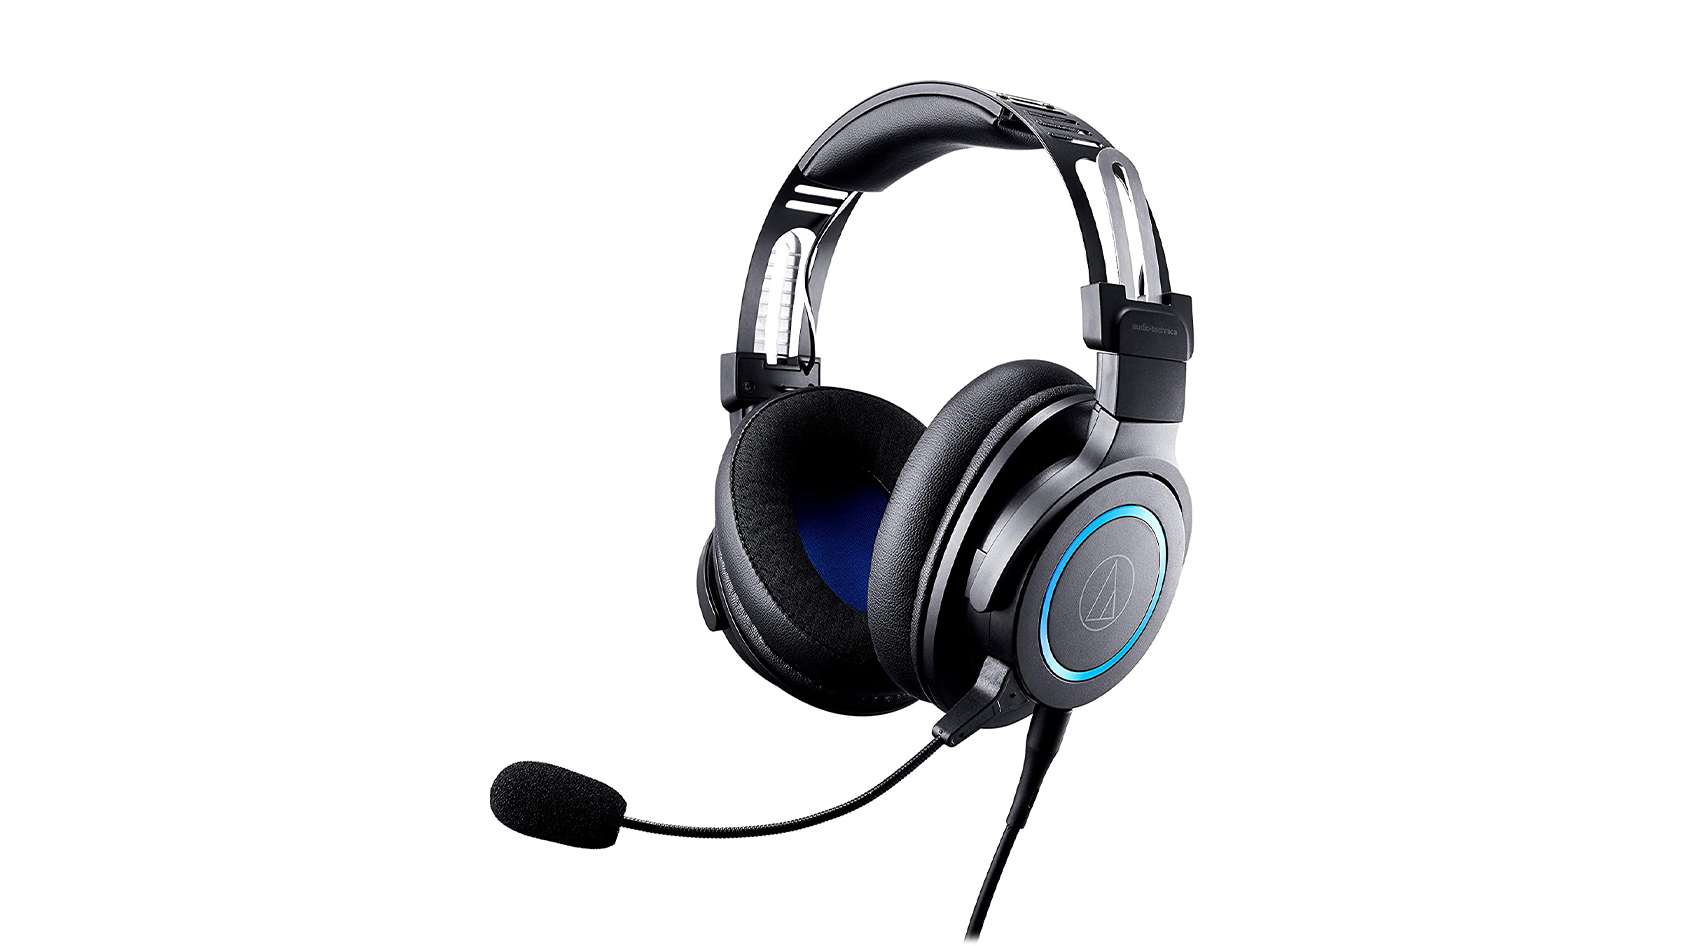 Audio-Technica ATH-G1 product image on white background.